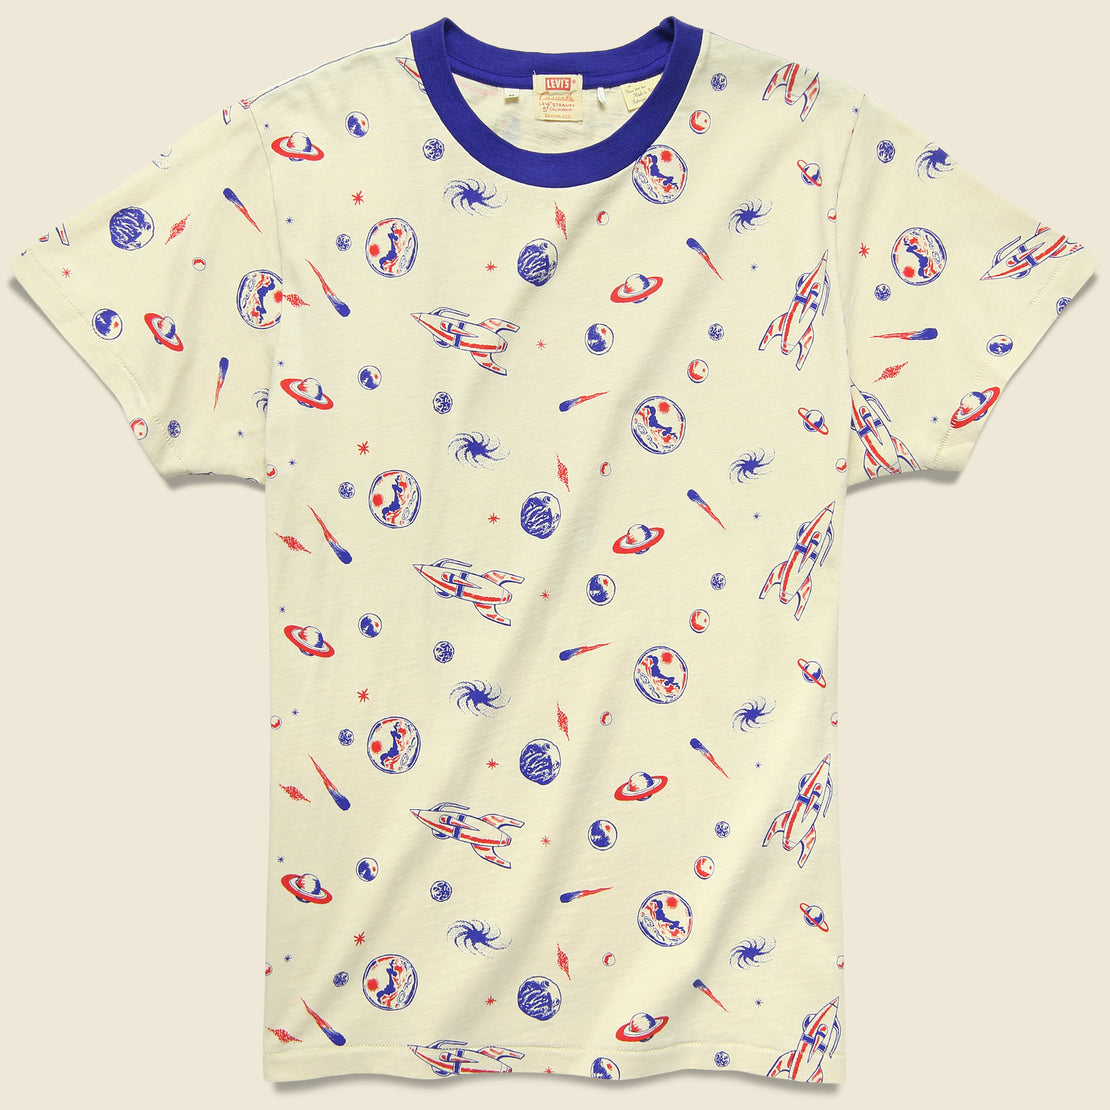 Levis Vintage Clothing Spaced All Over Graphic Tee - Creme Brulee